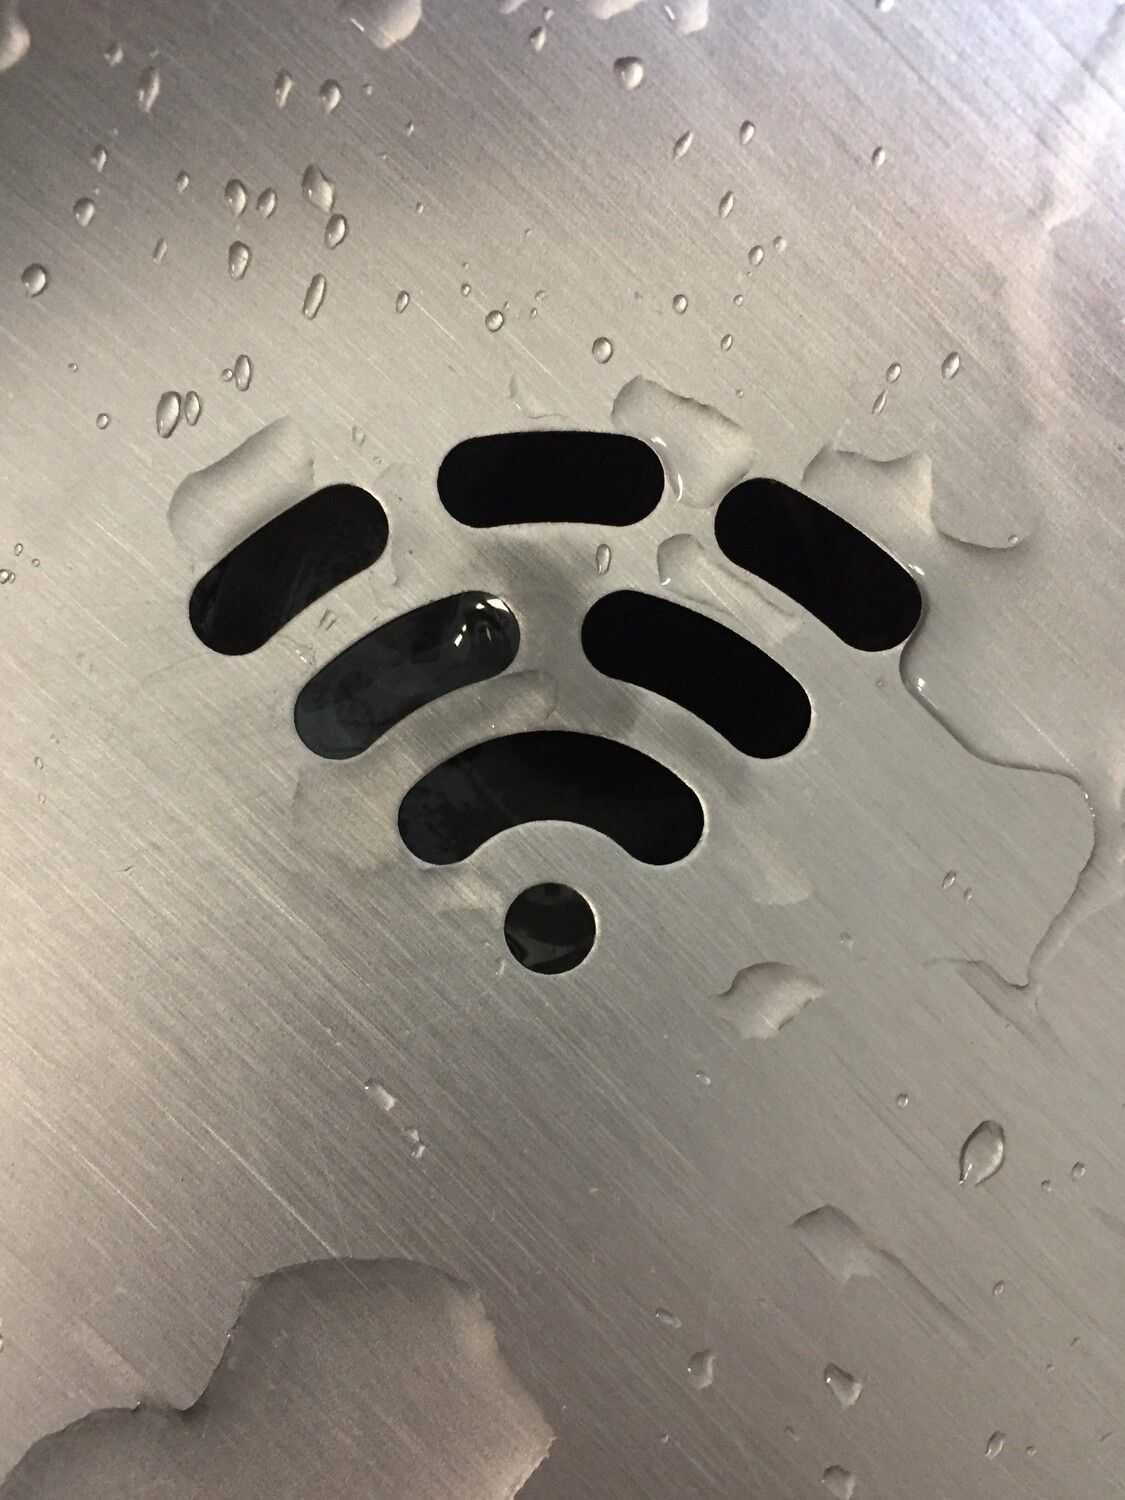 Photo of a metal drain, where the drain grate looks like a wifi symbol with some water visible around the drain